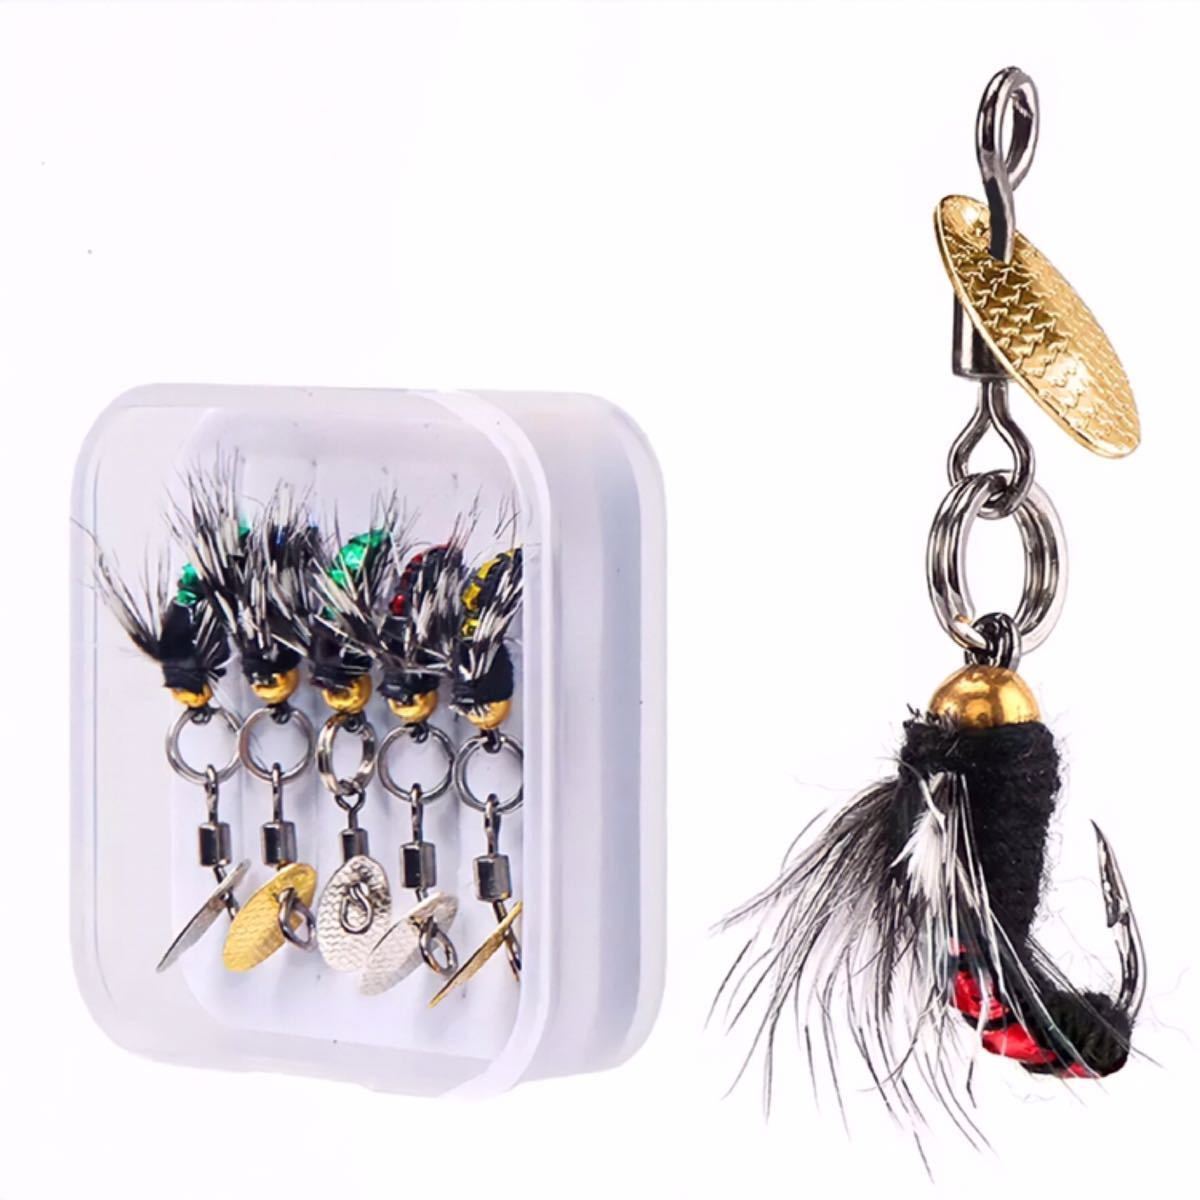  flight Lauto lure yamamete rest real ton kala final product fly fishing tube fishing spinner insect fishing gear hand made 